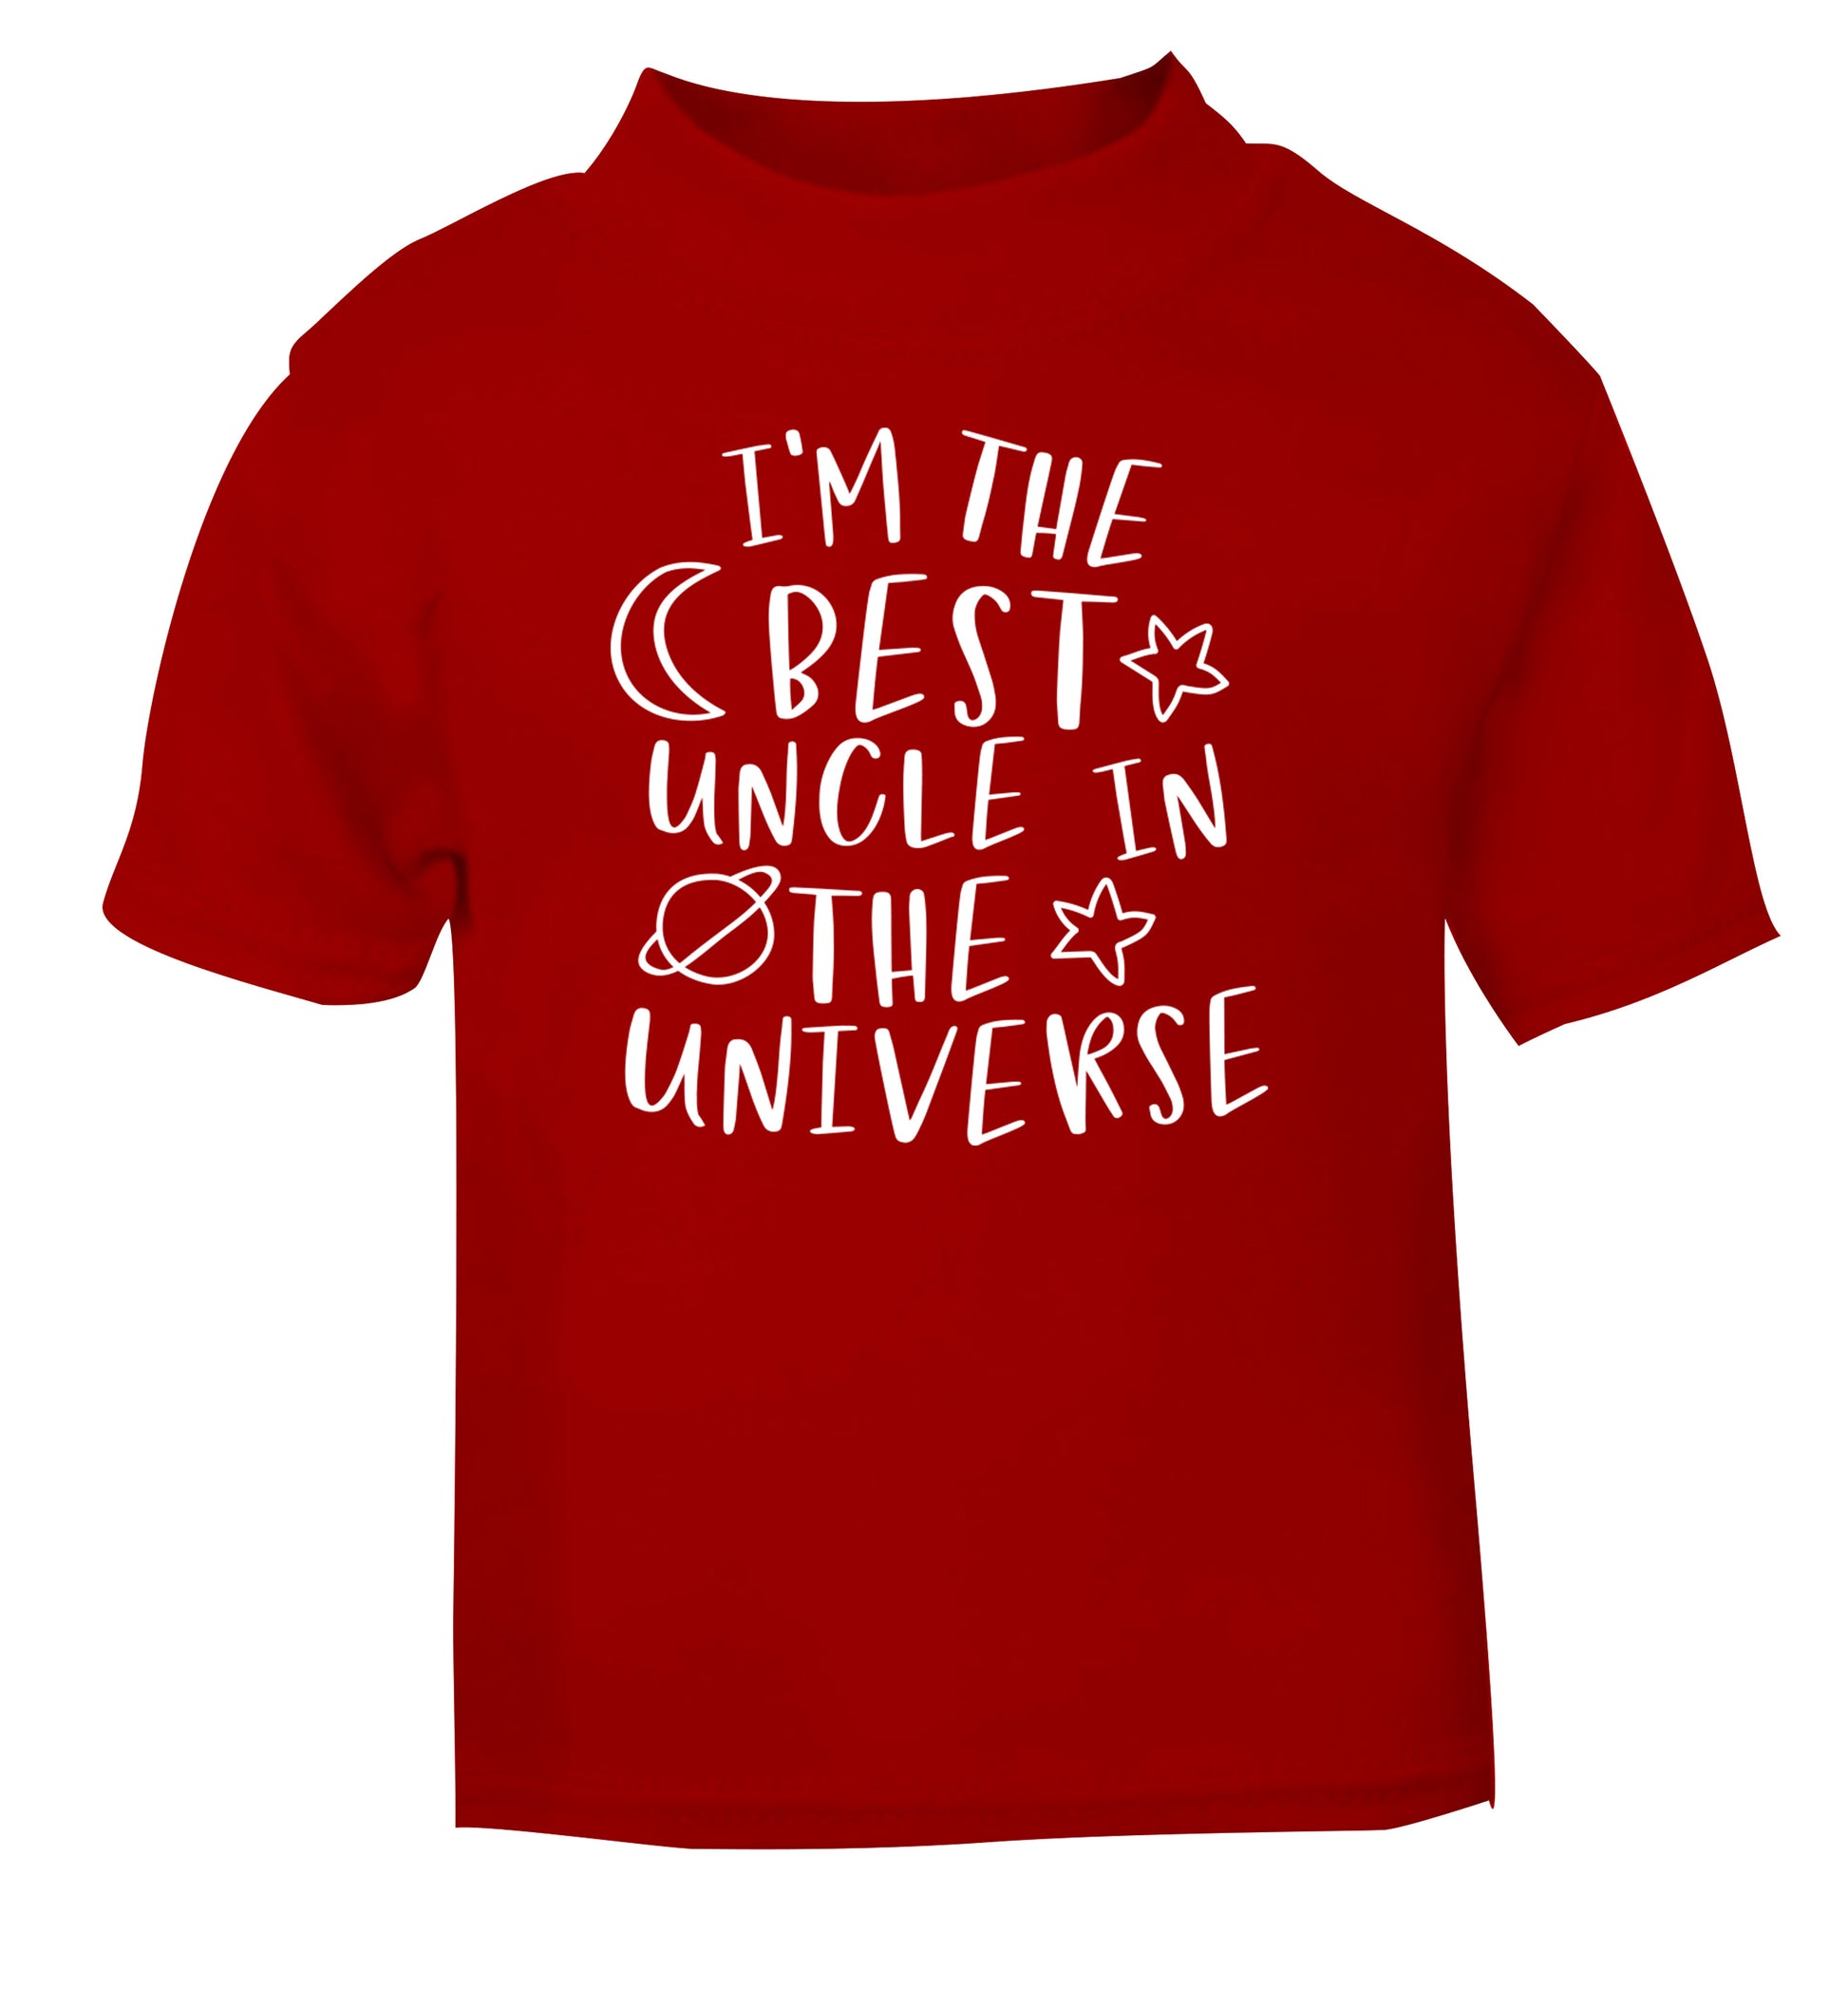 I'm the best uncle in the universe red Baby Toddler Tshirt 2 Years